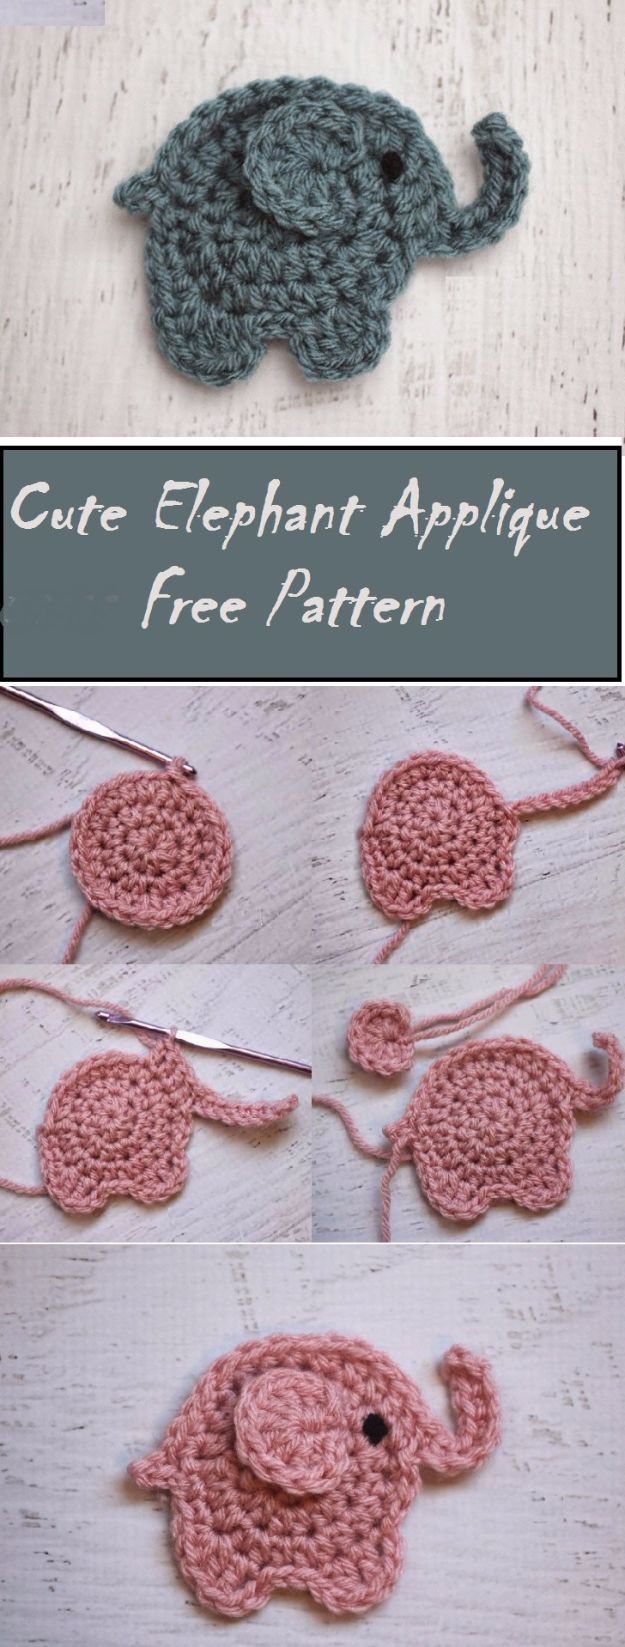 DIY Ideas With Elephants - Cute Elephant Applique - Easy Wall Art Ideas, Crafts, Jewelry, Arts and Craft Projects for Kids, Teens and Adults- Simple Canvases, Throw Pillows, Cute Paintings for Nurseries, Dollar Store Crafts and Fun Dorm Room and Bedroom Decor - Tutorials for Crafty Ideas Decorated With an Elephant